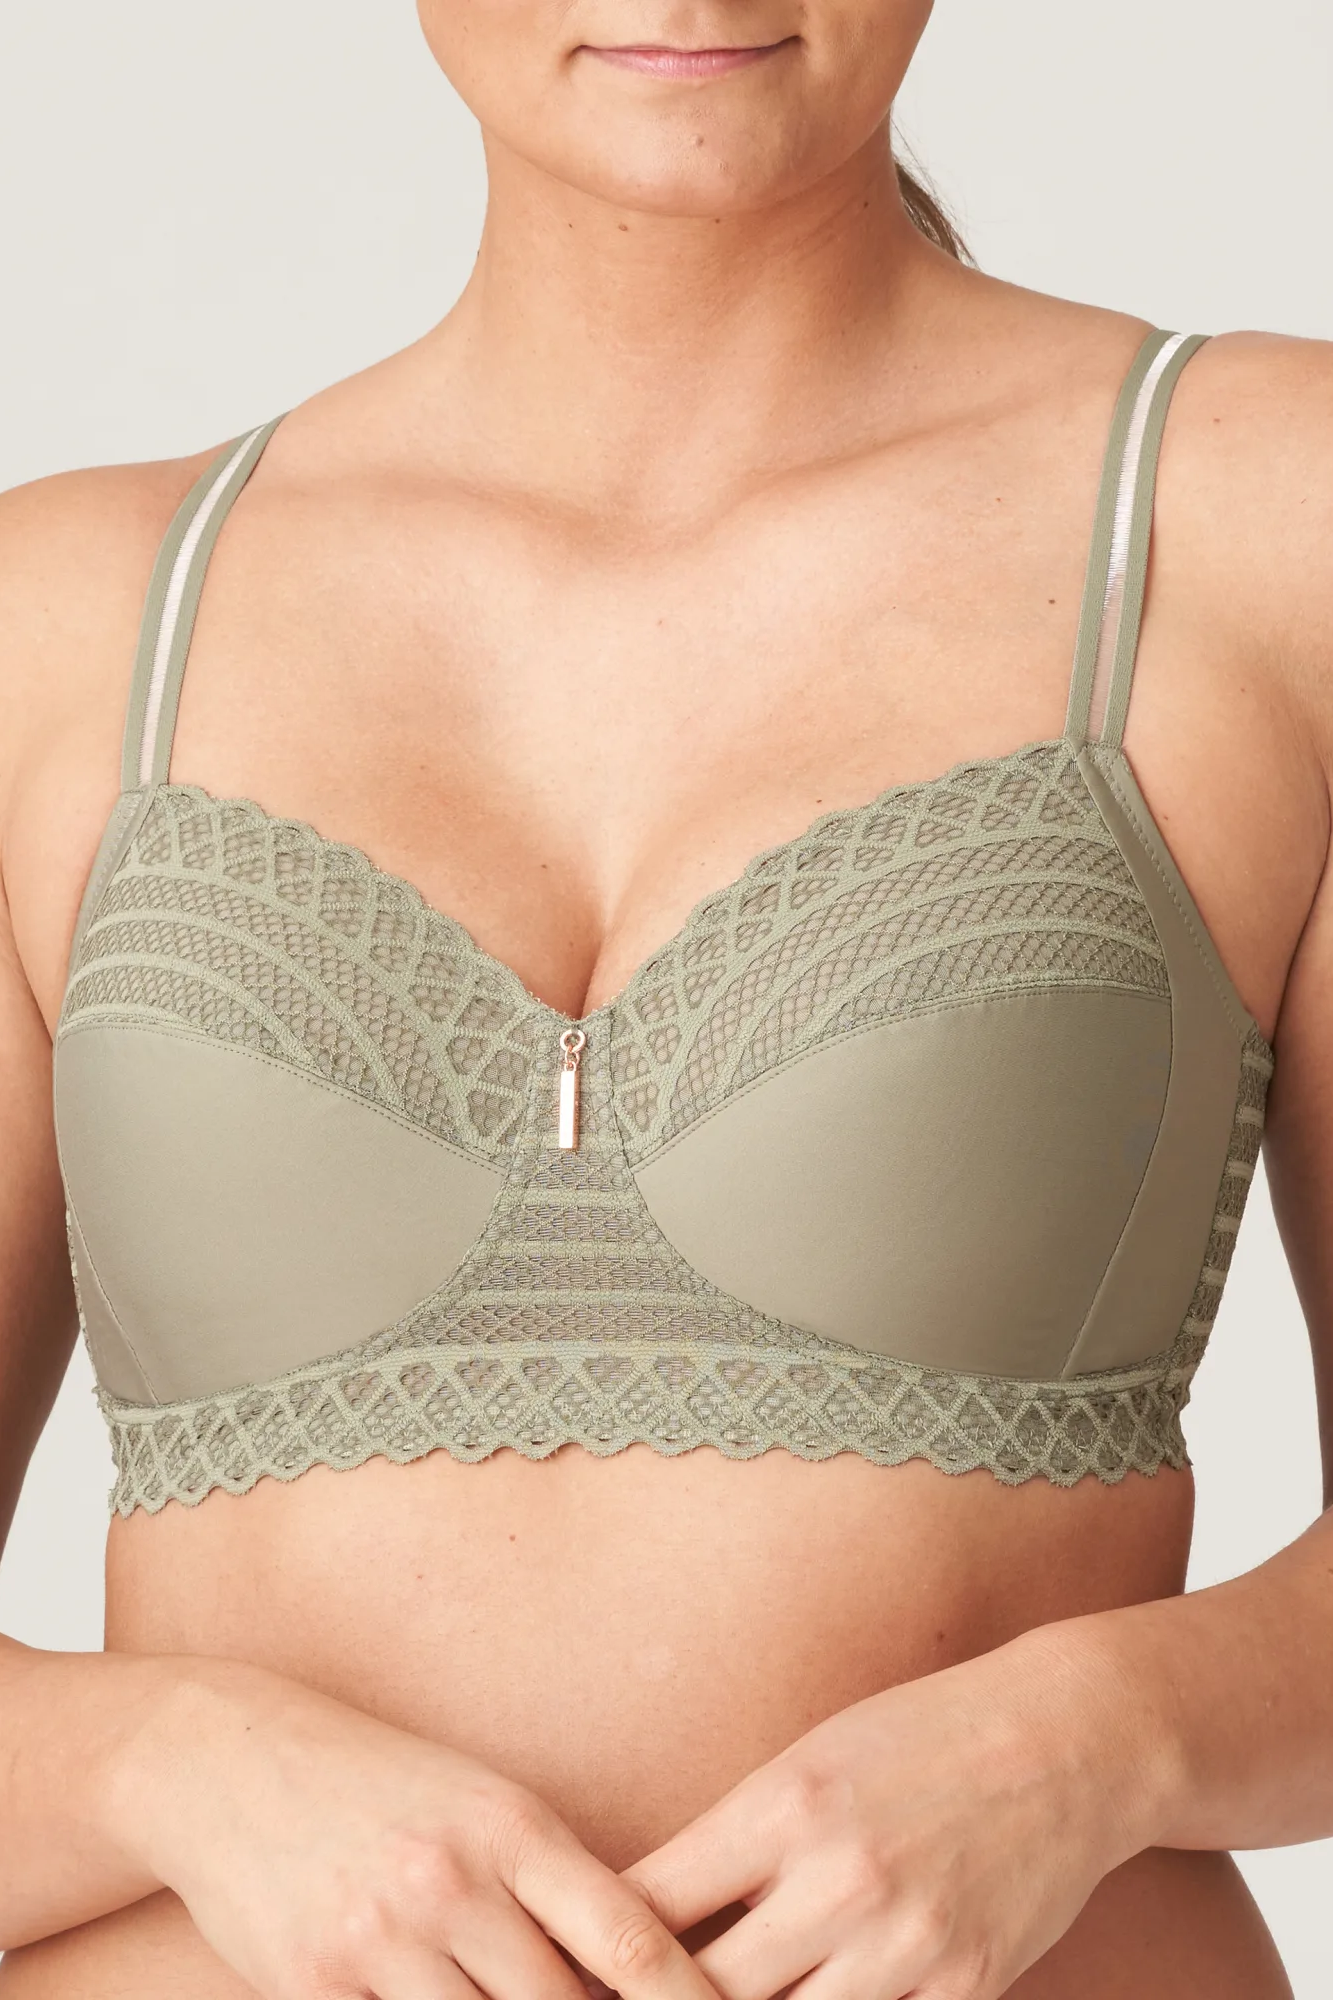 PrimaDonna Twist East End Full Cup Bra Wireless BOTANIQUE buy for the best  price CAD$ 150.00 - Canada and U.S. delivery – Bralissimo